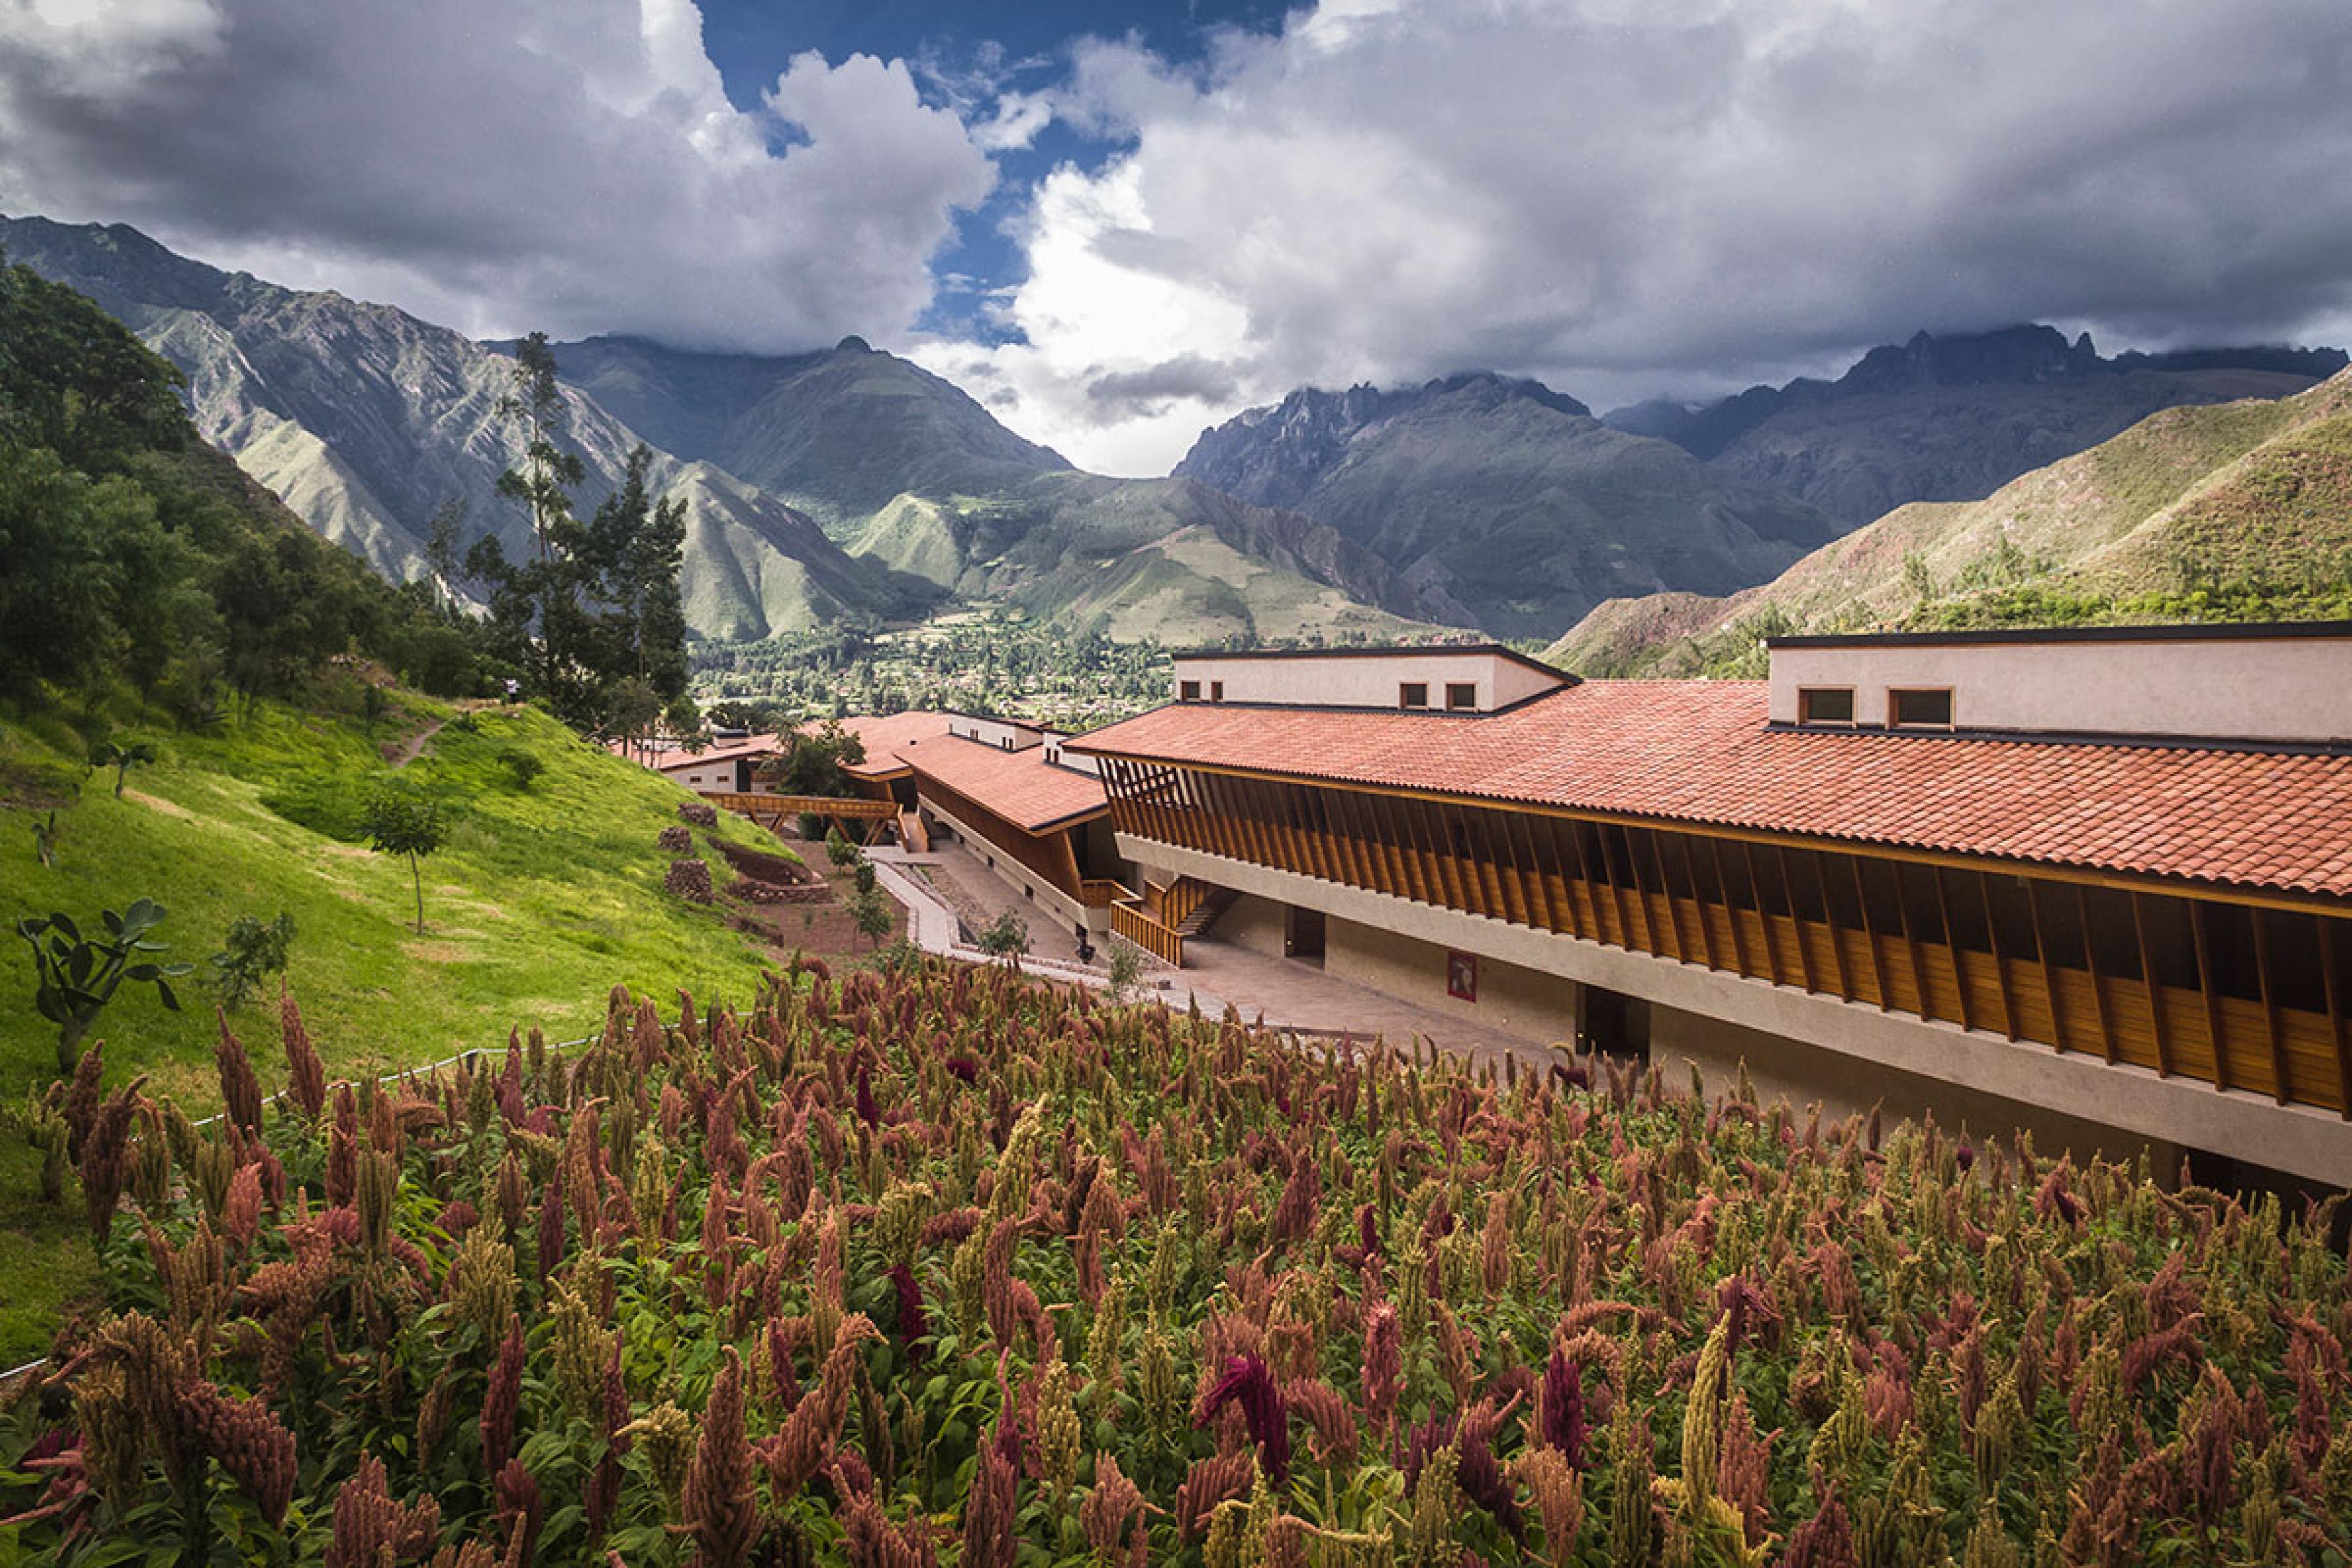 view of hotel exterior with red tile roof and long hotel building in a mountain valley